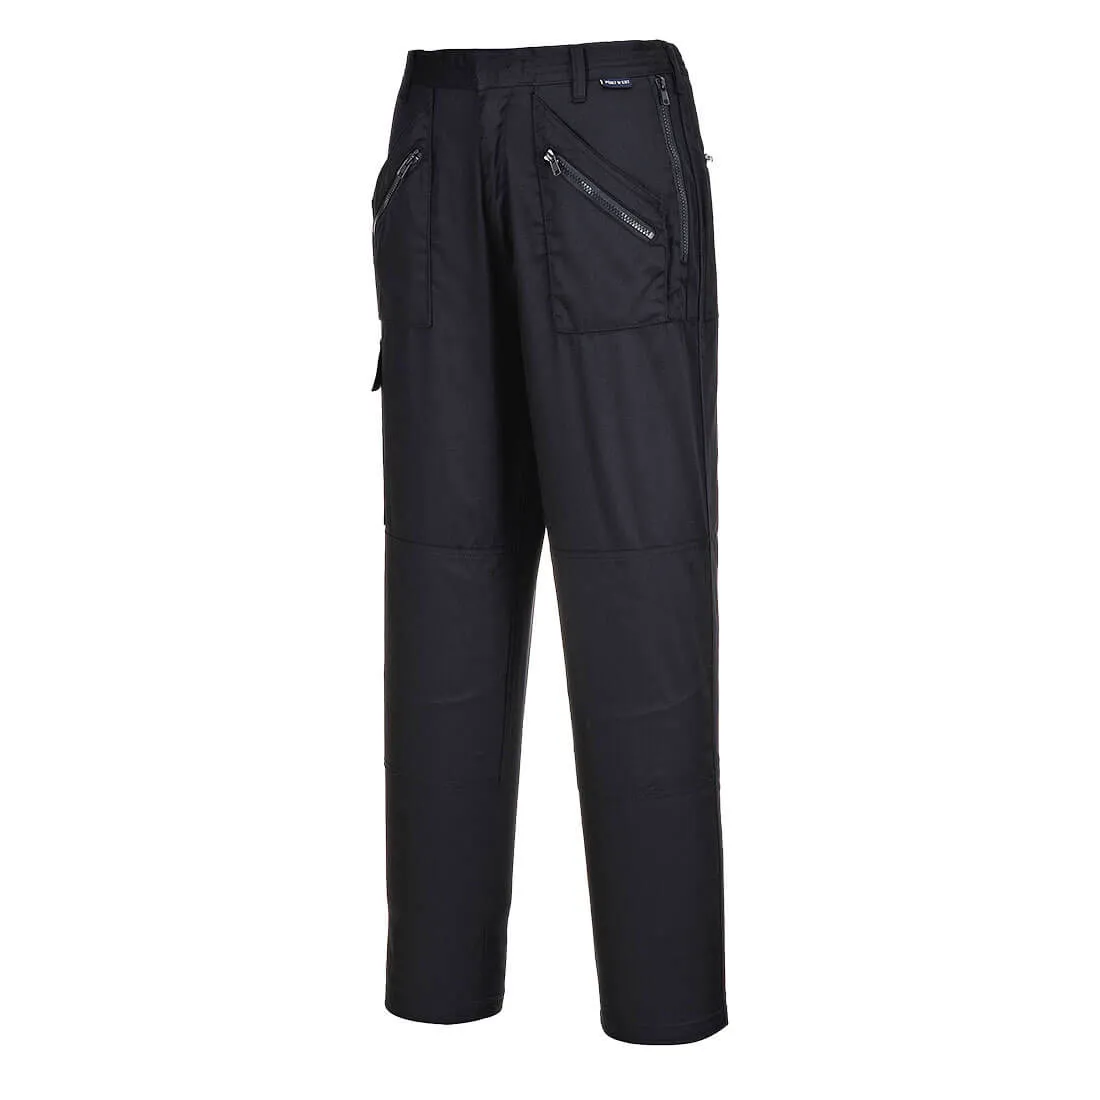 Portwest Ladies S687 Action Trousers - Black, Extra Small, 31"